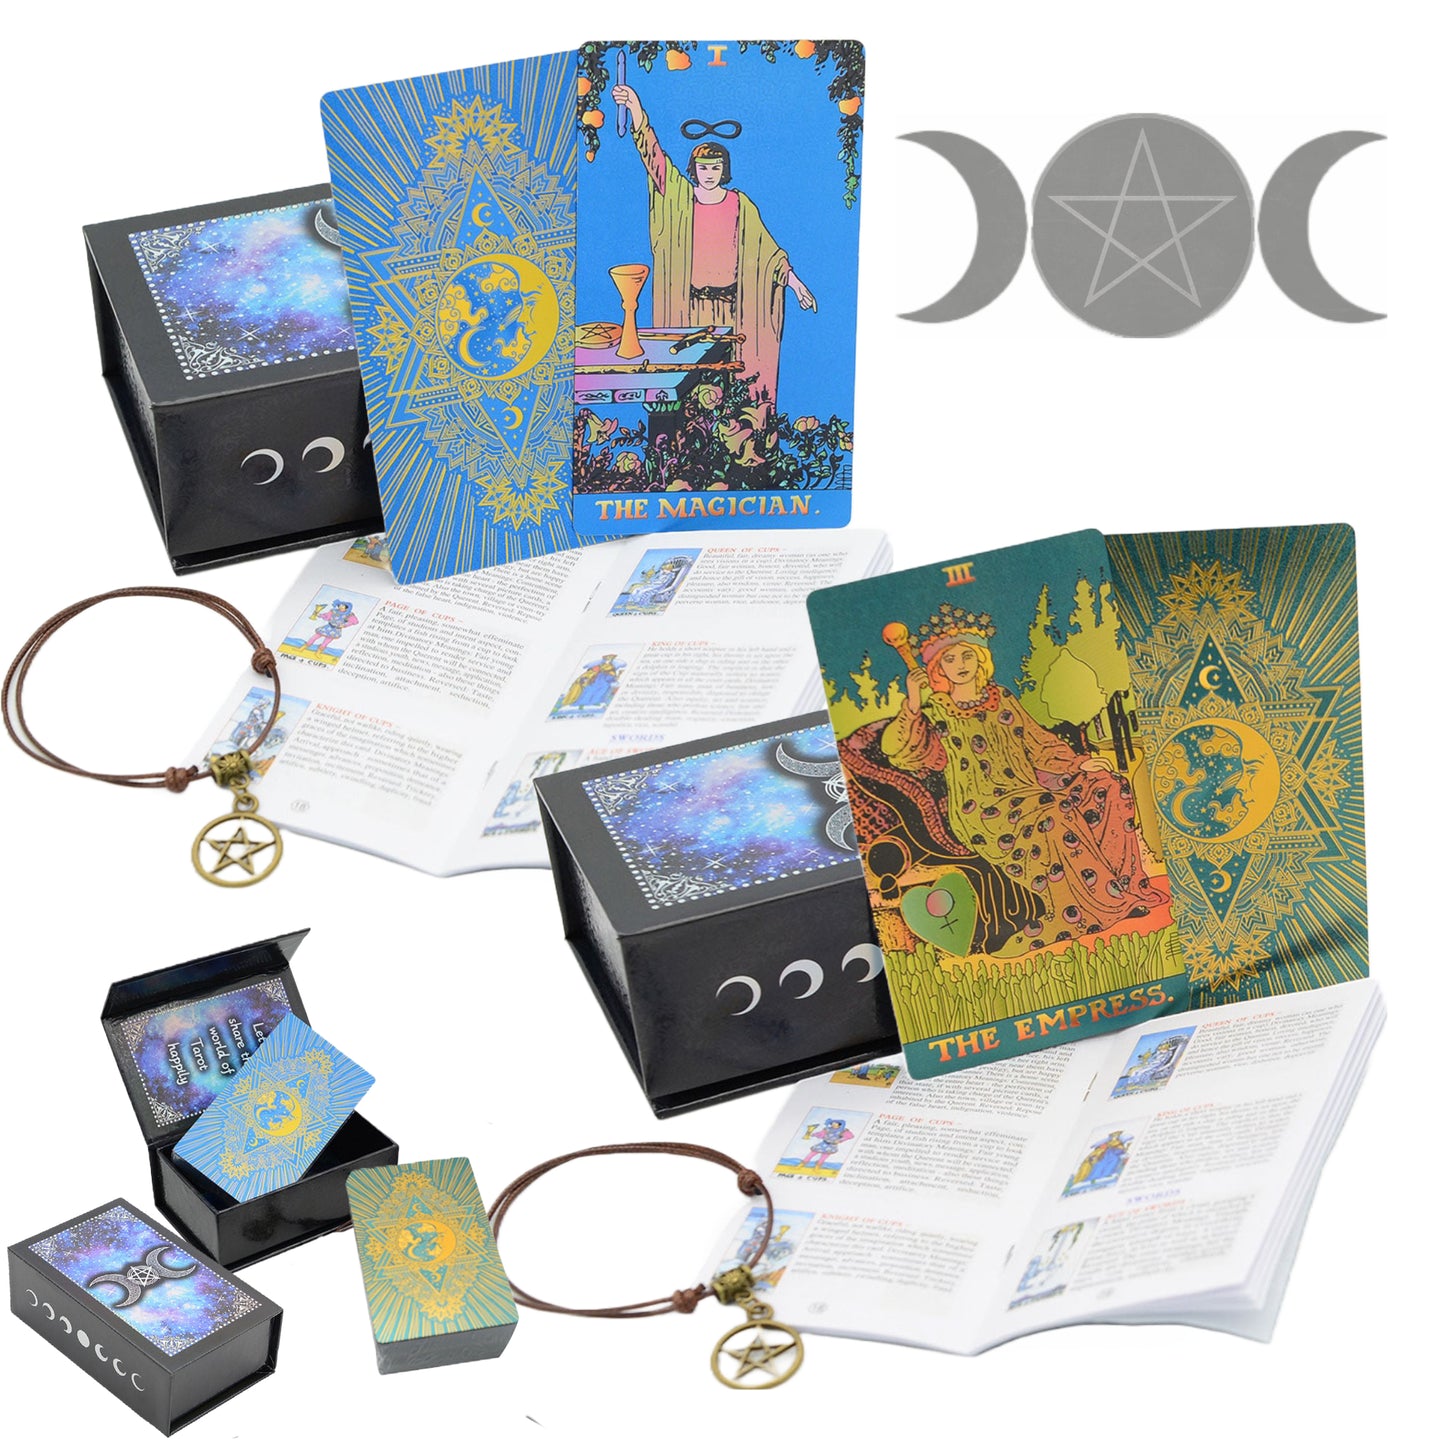 Colorful Tarot Deck In Premium Witchy Gift Box | Premium PVC Cards With English Guidebook For Beginners In Divination | Apollo Tarot Shop